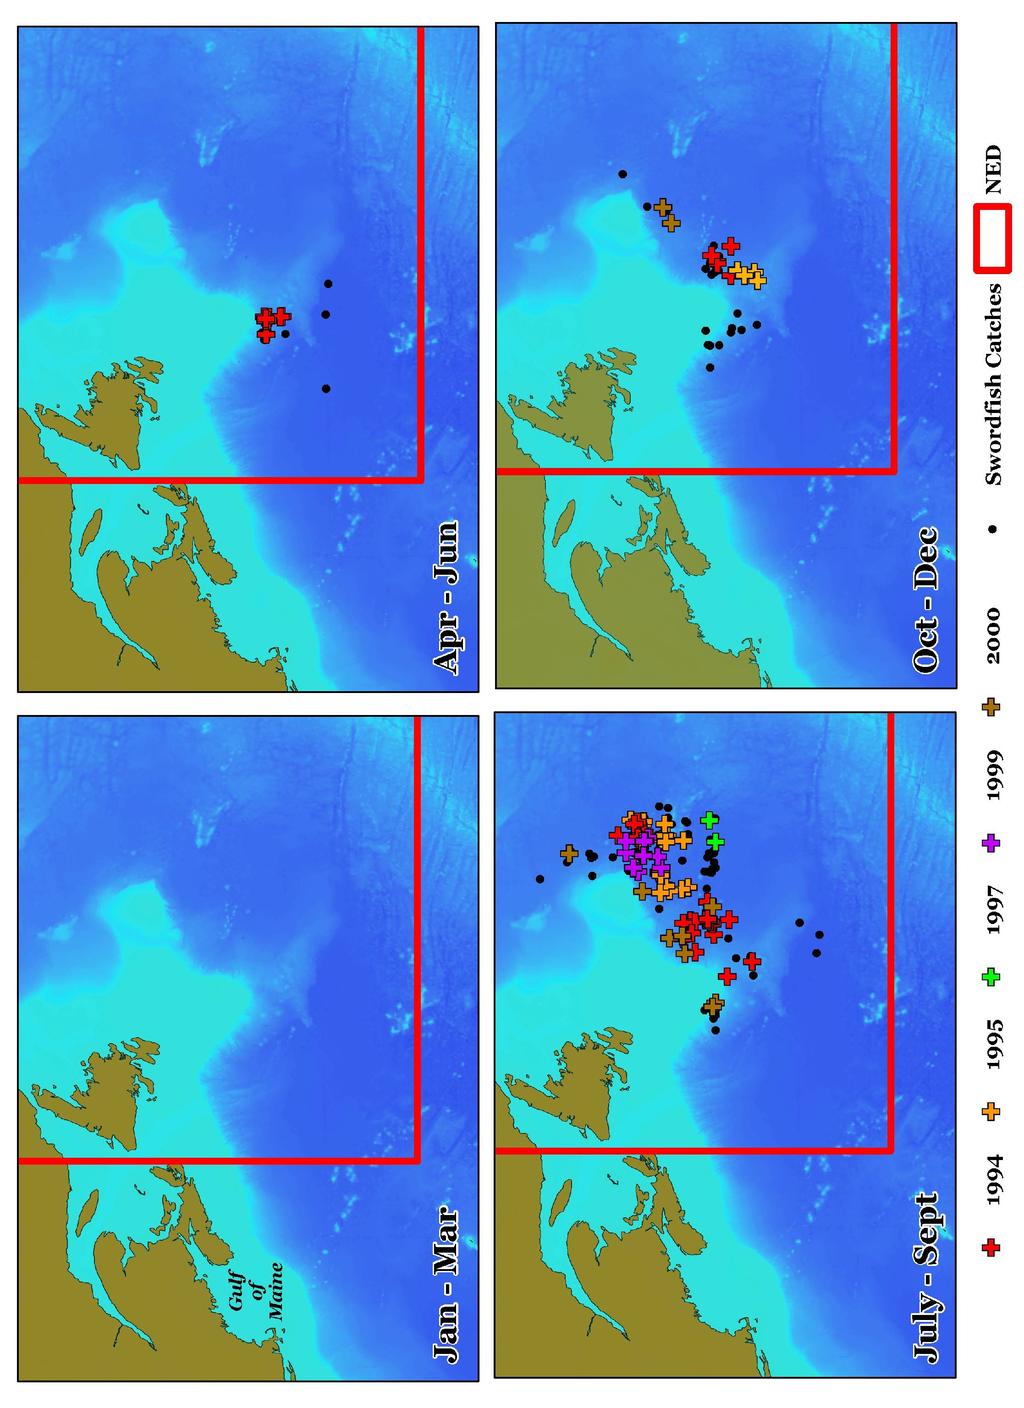 36 North Atlantic transition zone Figure 8: Spatial and temporal distribution of